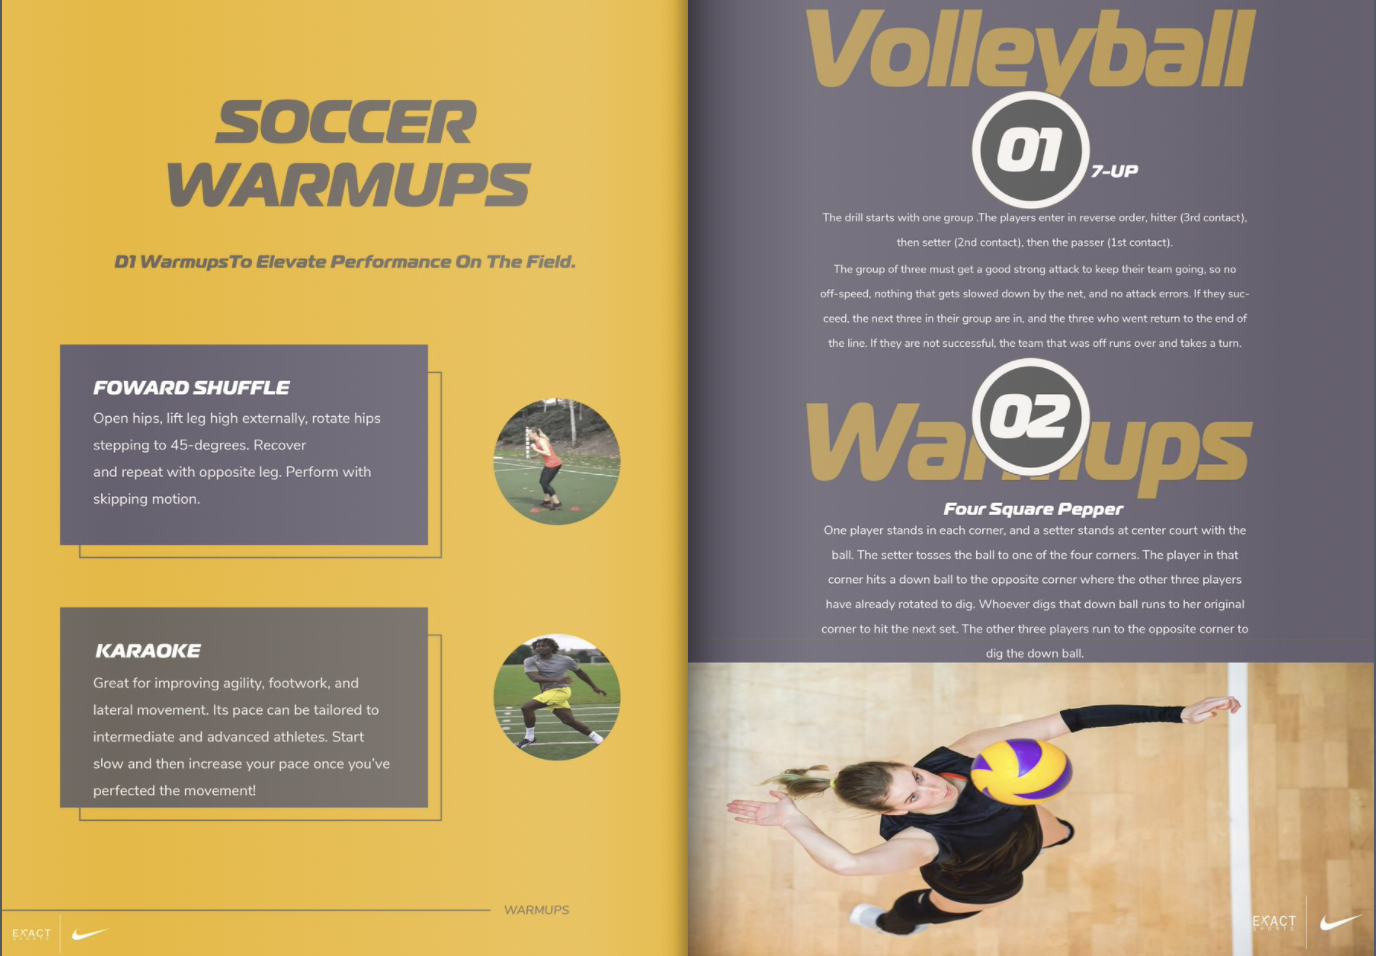 Top Soccer and Volleyball Warmups In the Athlete Performance Manual Written By EXACT Sports